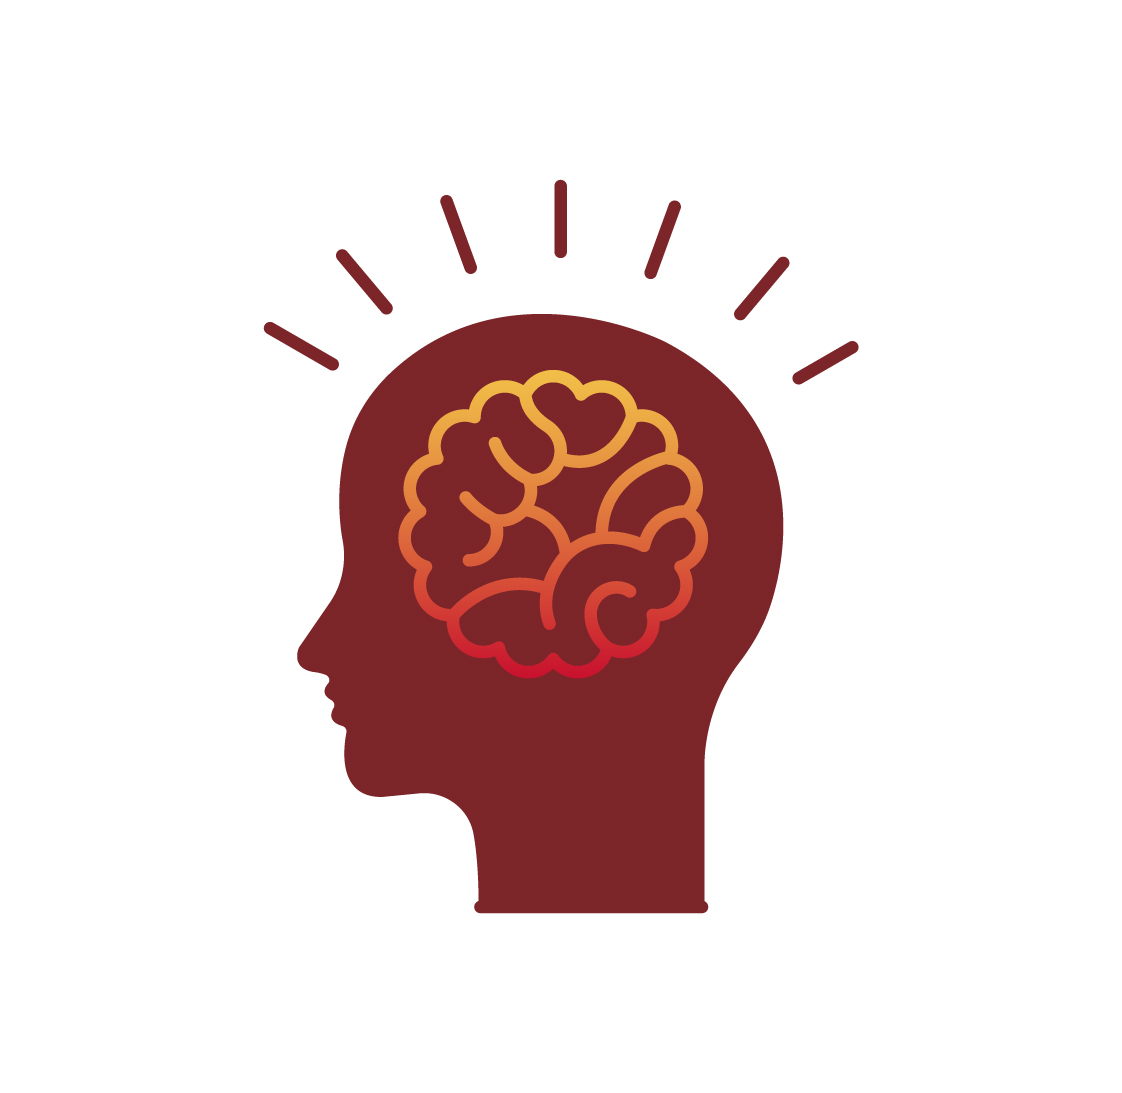 Illustrated icon of a brain